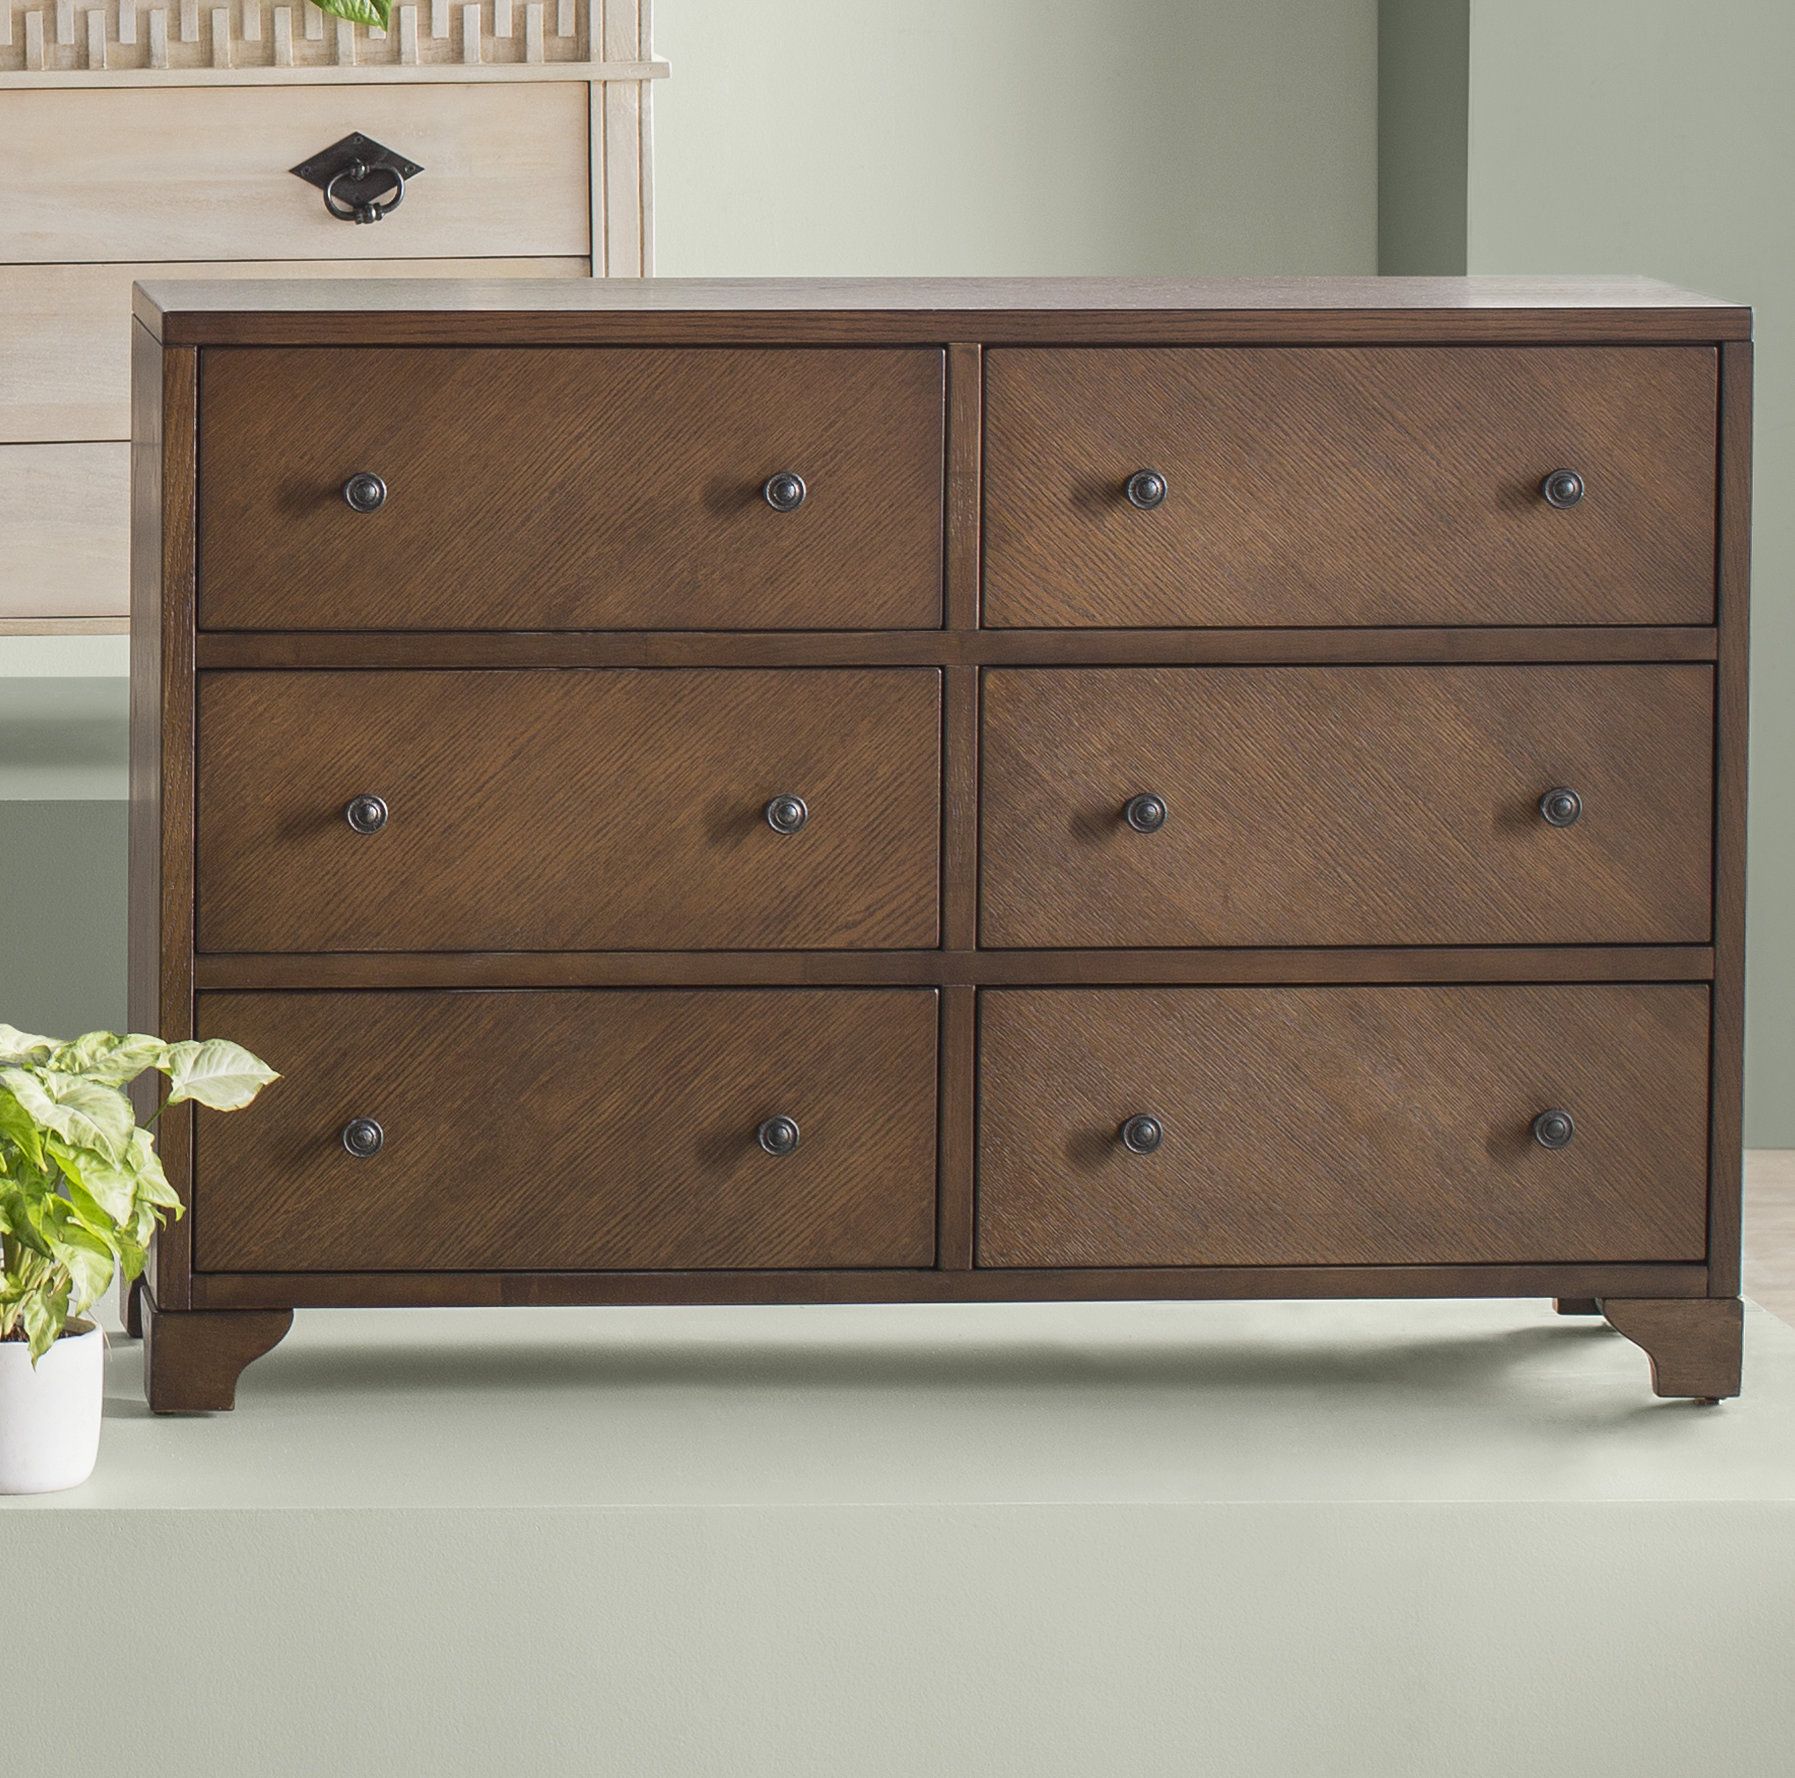 Naylor Sideboard With Most Popular Adkins Sideboards (View 18 of 20)